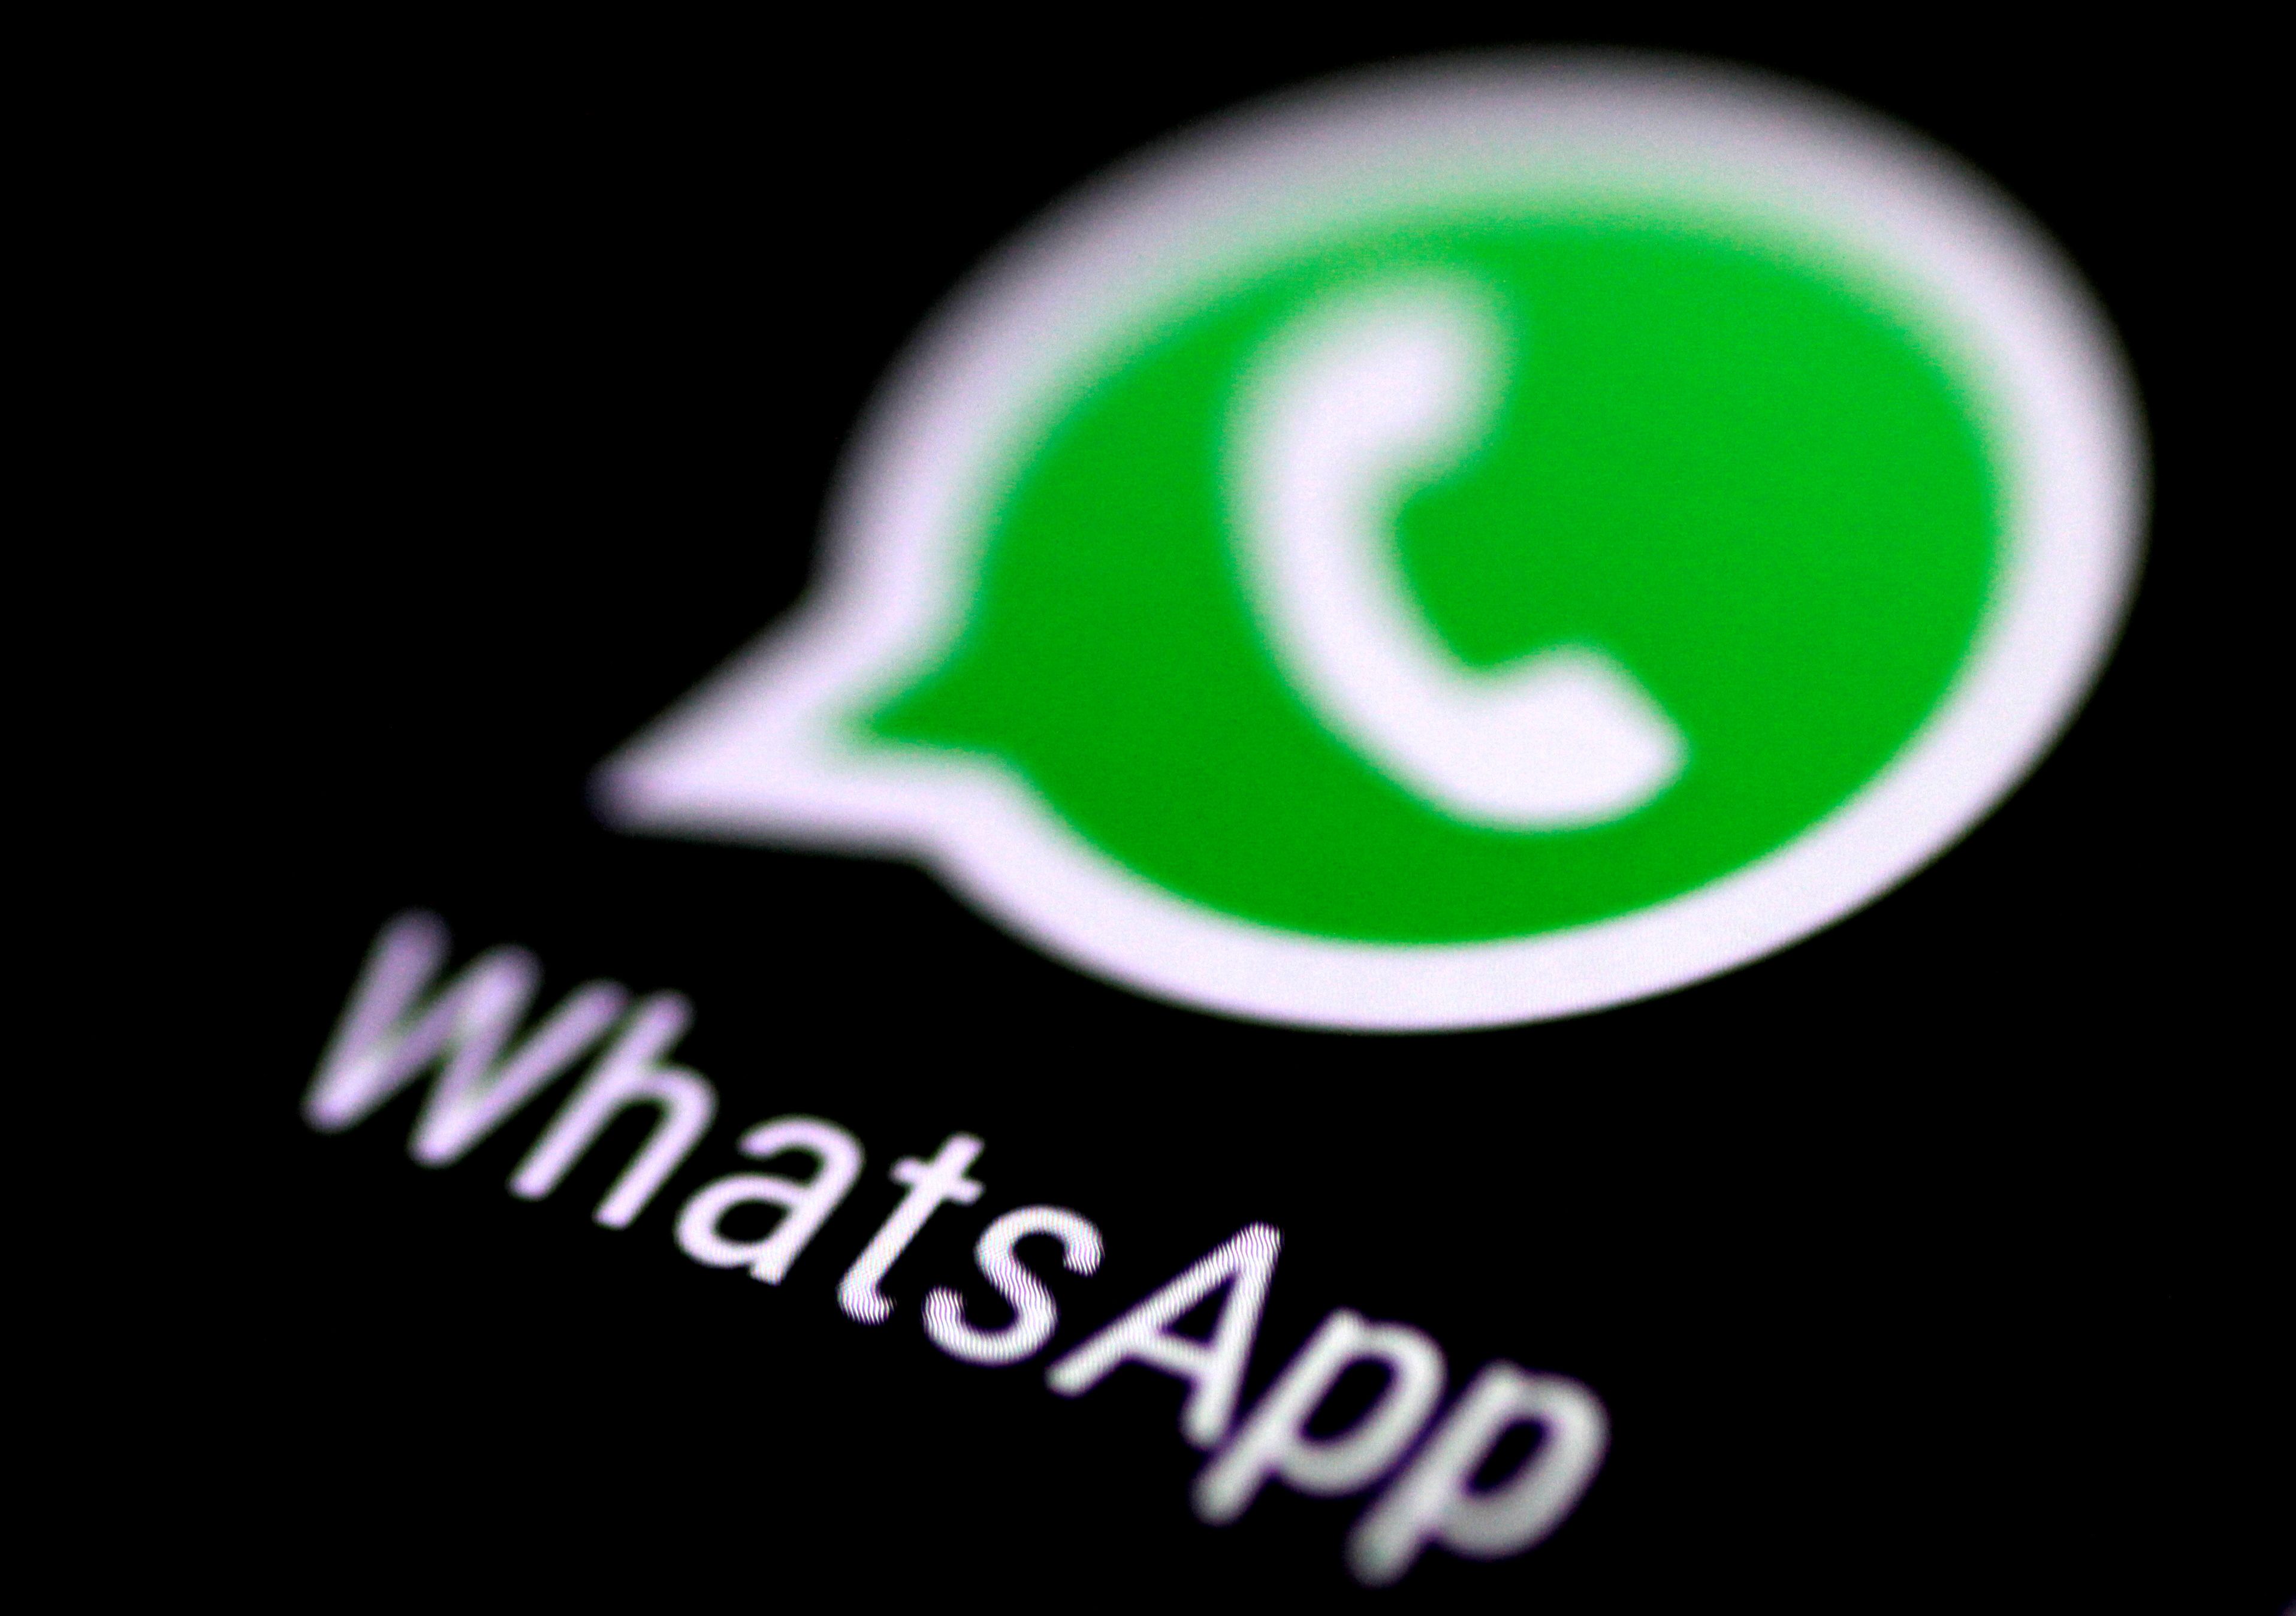 Turkey says WhatsApp will drop data collection update after probe